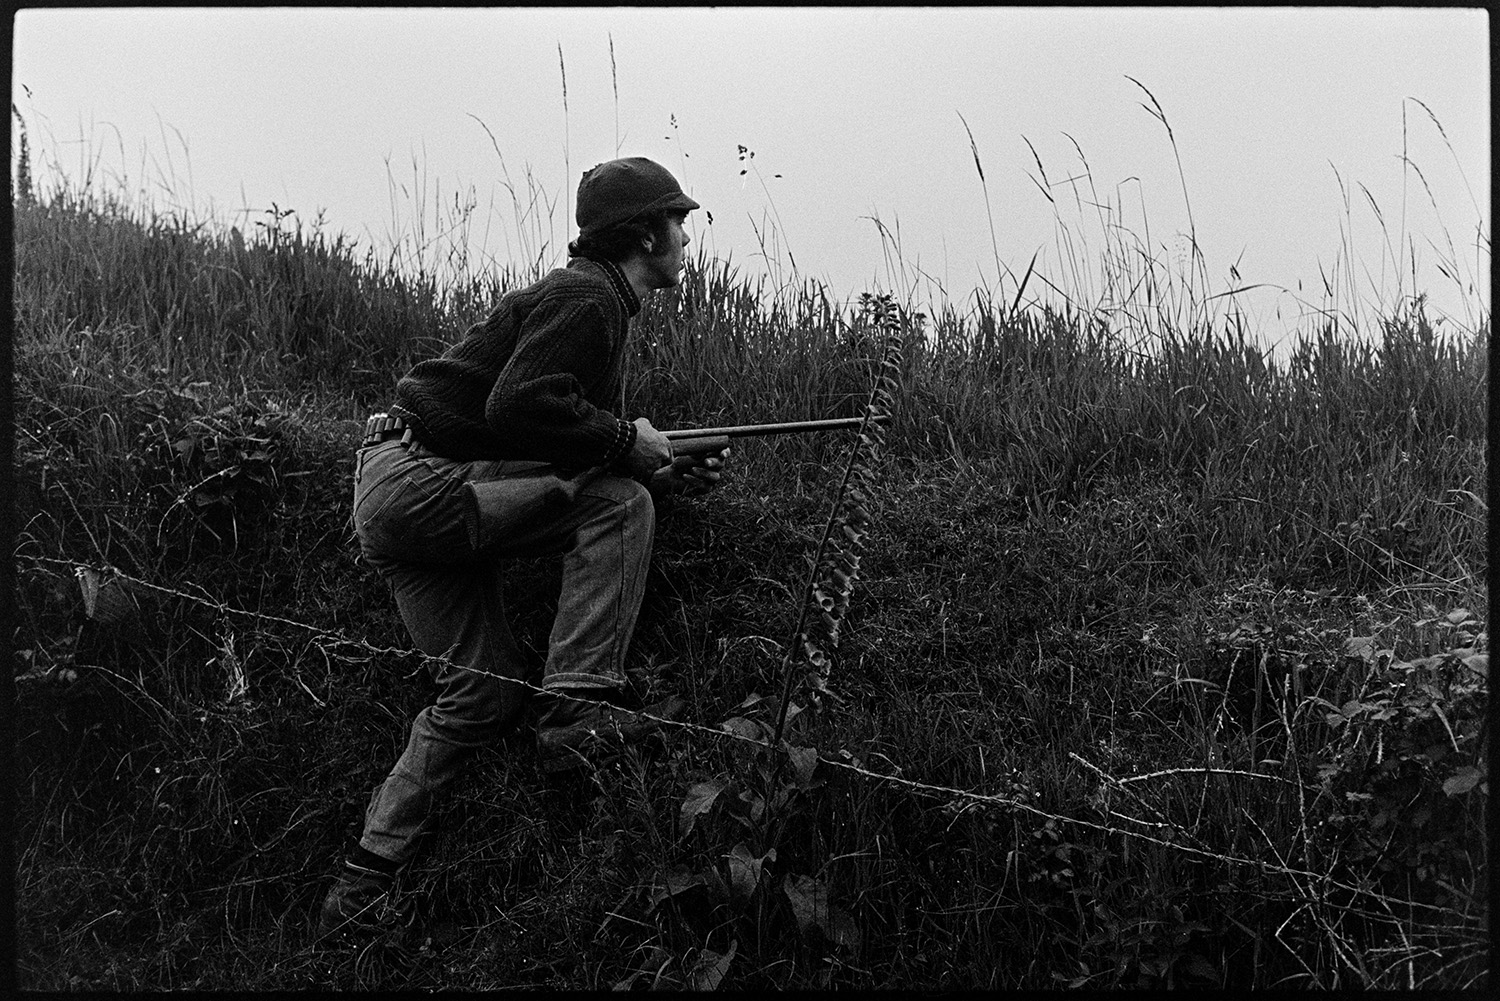 Man shooting rabbits with gun. 
[David Ward climbing up a hedge bank looking for rabbits to shoot at Parsonage, Iddesleigh. He is holding a shotgun and a foxglove is visible in the hedge.]